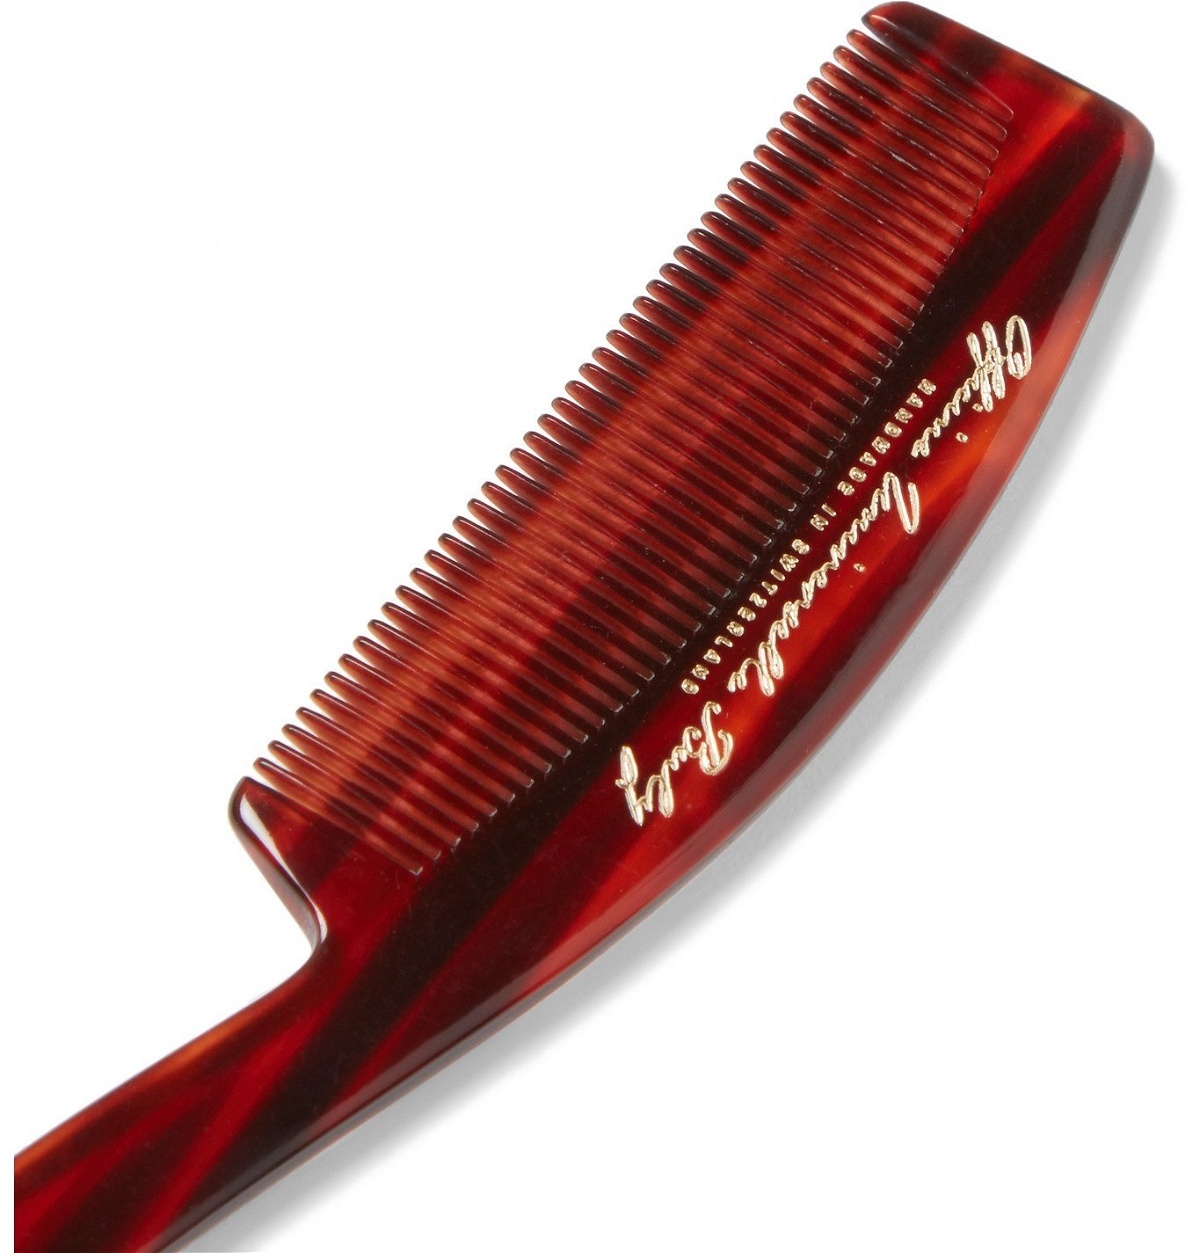 Buly 1803 - Horn-Effect Acetate Beard Comb - Red Buly 1803